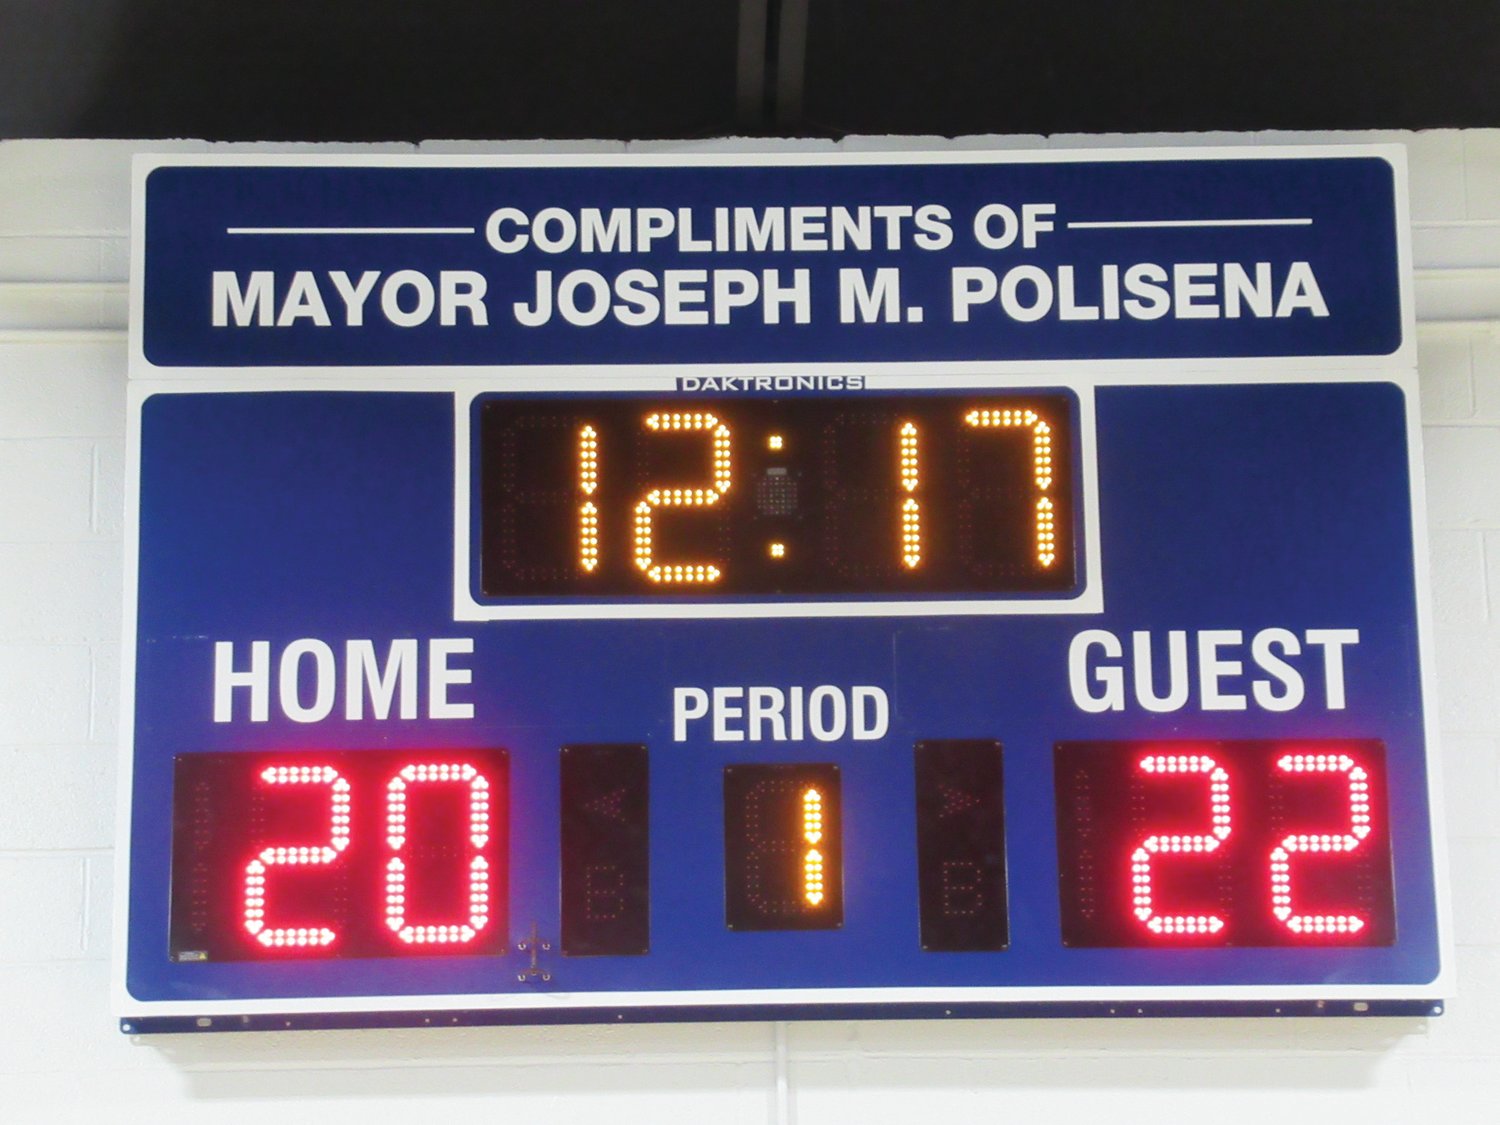 MAYOR’S MARK: Through the generosity of Johnston Mayor Joseph Polisena, the “new” Rainone Gym has an official electric scoreboard he purchased during the rebuilding project. It was the second such gift he gave to the town, the first being a scoreboard inside the Daniel E. Mazzulla Jr. Indoor Recreation Center.